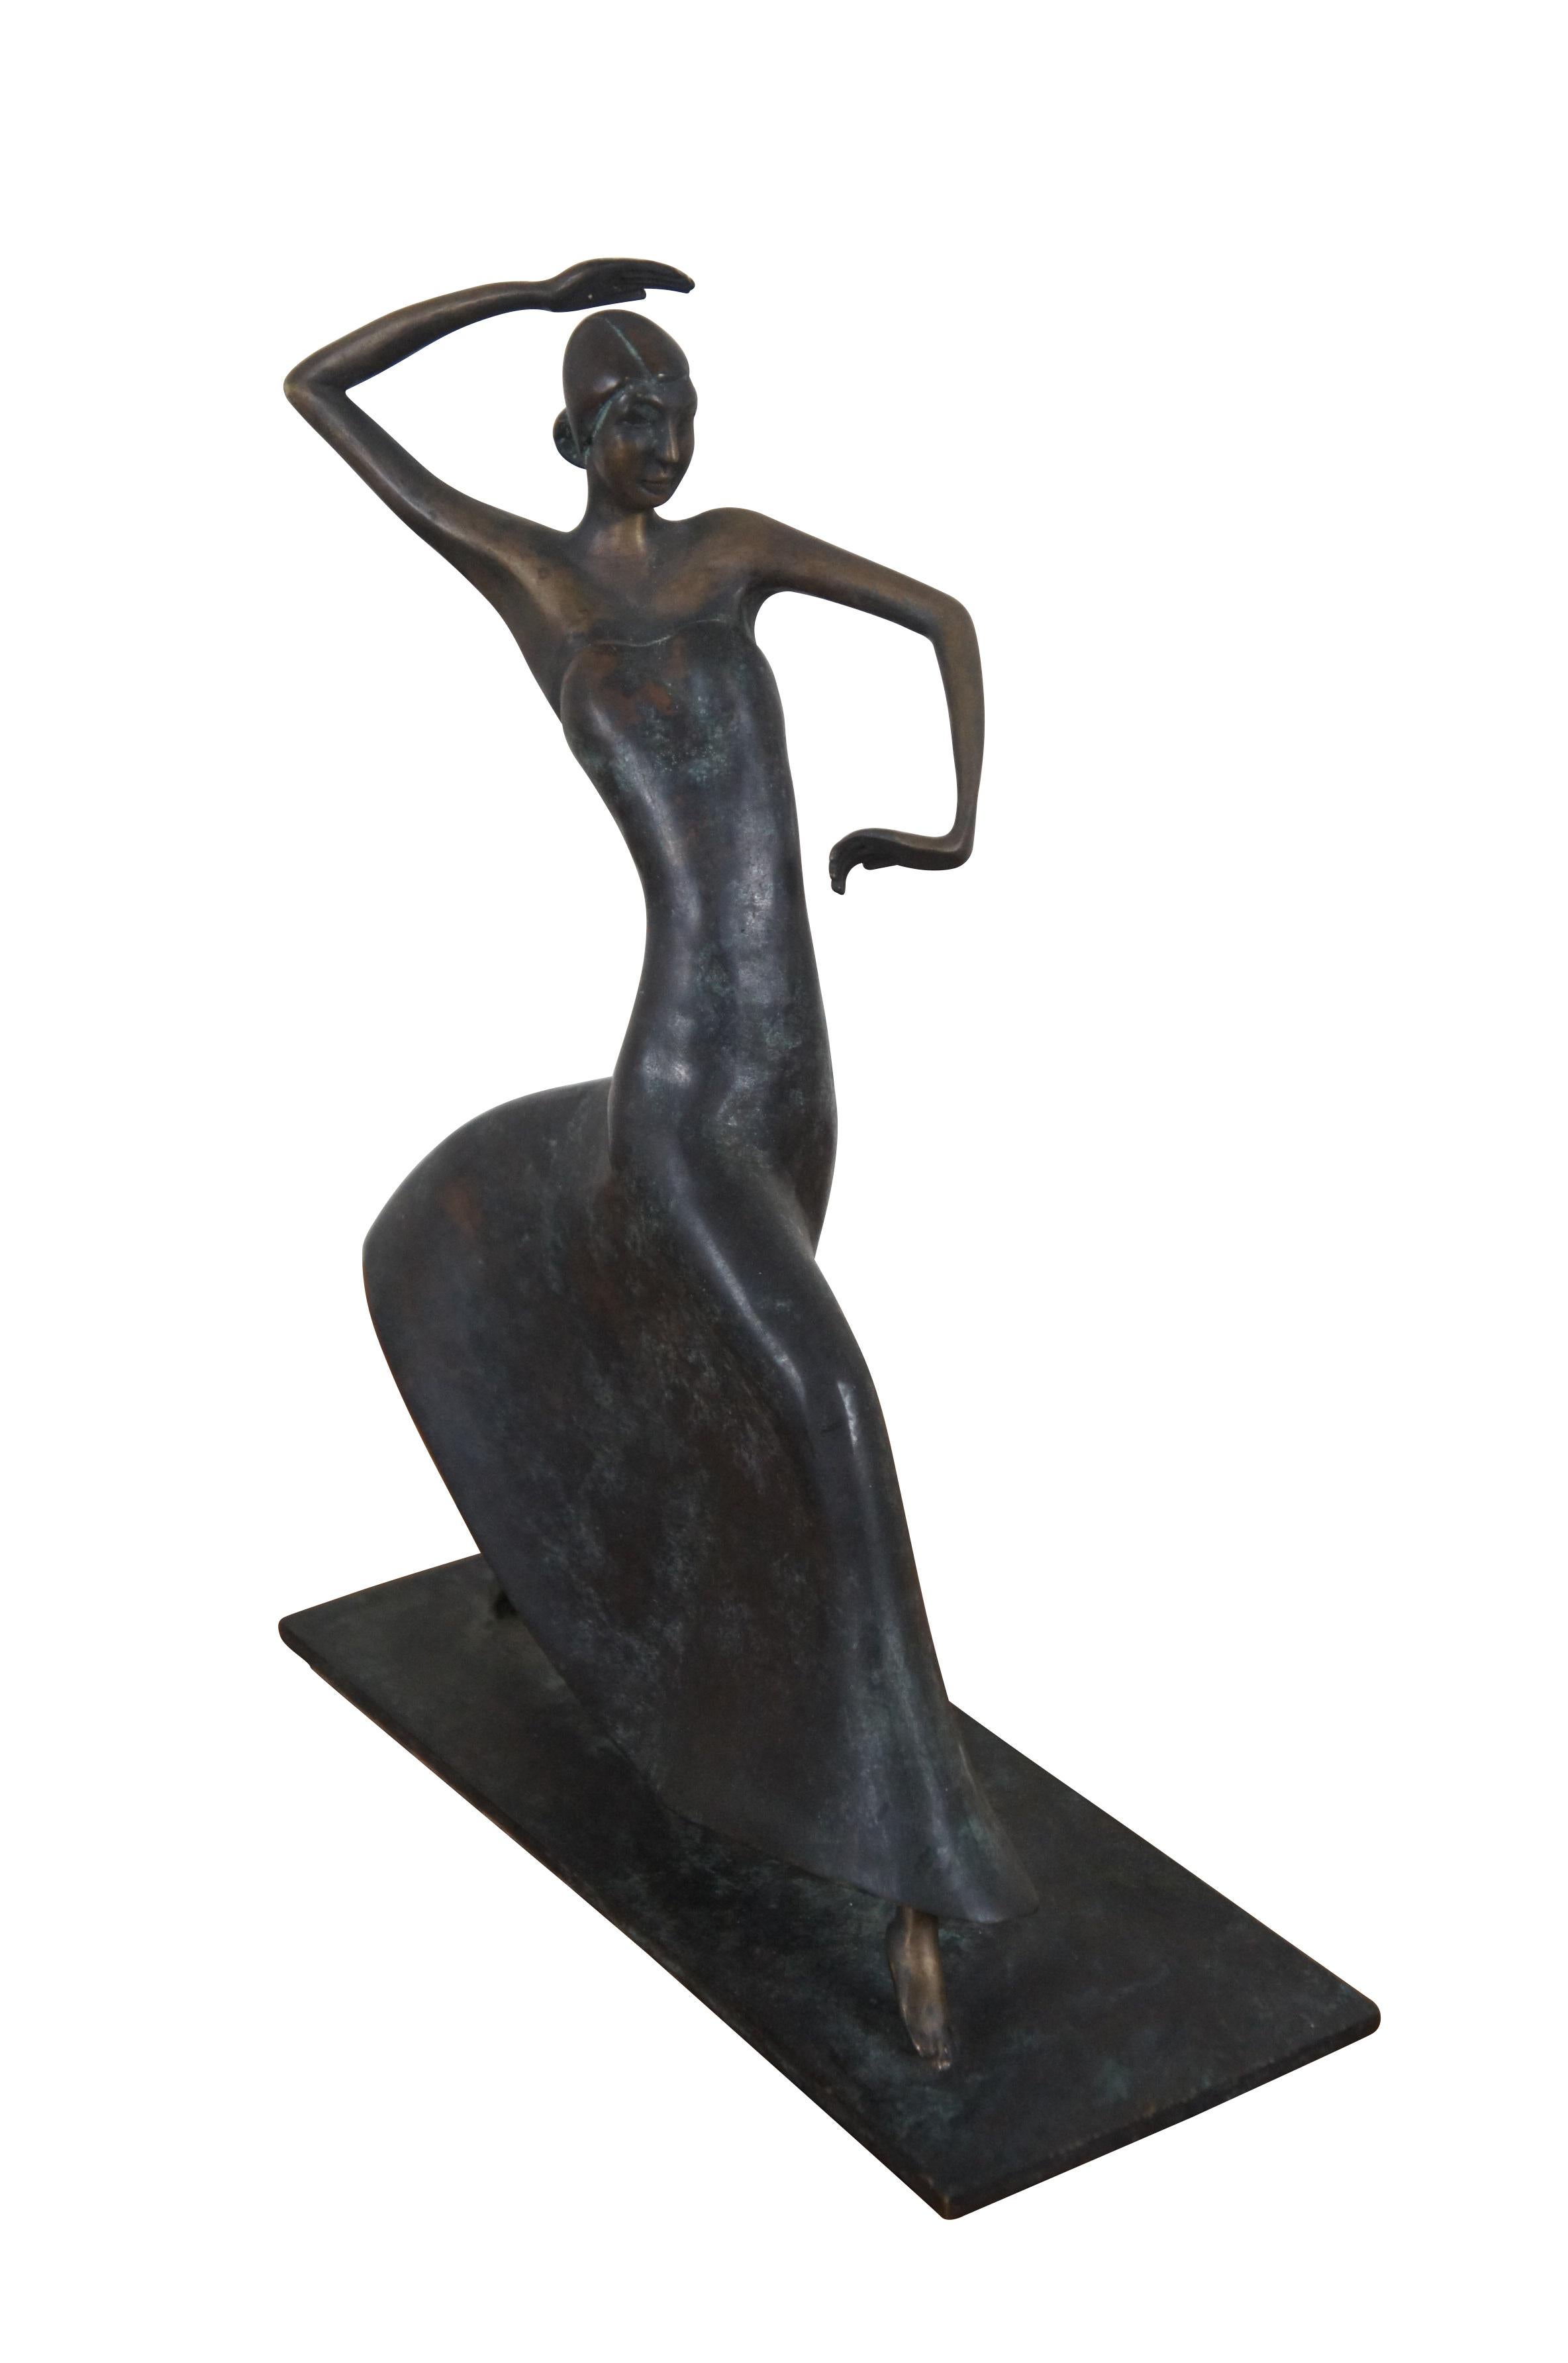 Rare late 20th century bronze statuette / figurine by Maitland Smith, inspired by Karl Hagenauer's 1930's art deco sculpture of dancer Josephine Baker. Hand made in Philippines.

